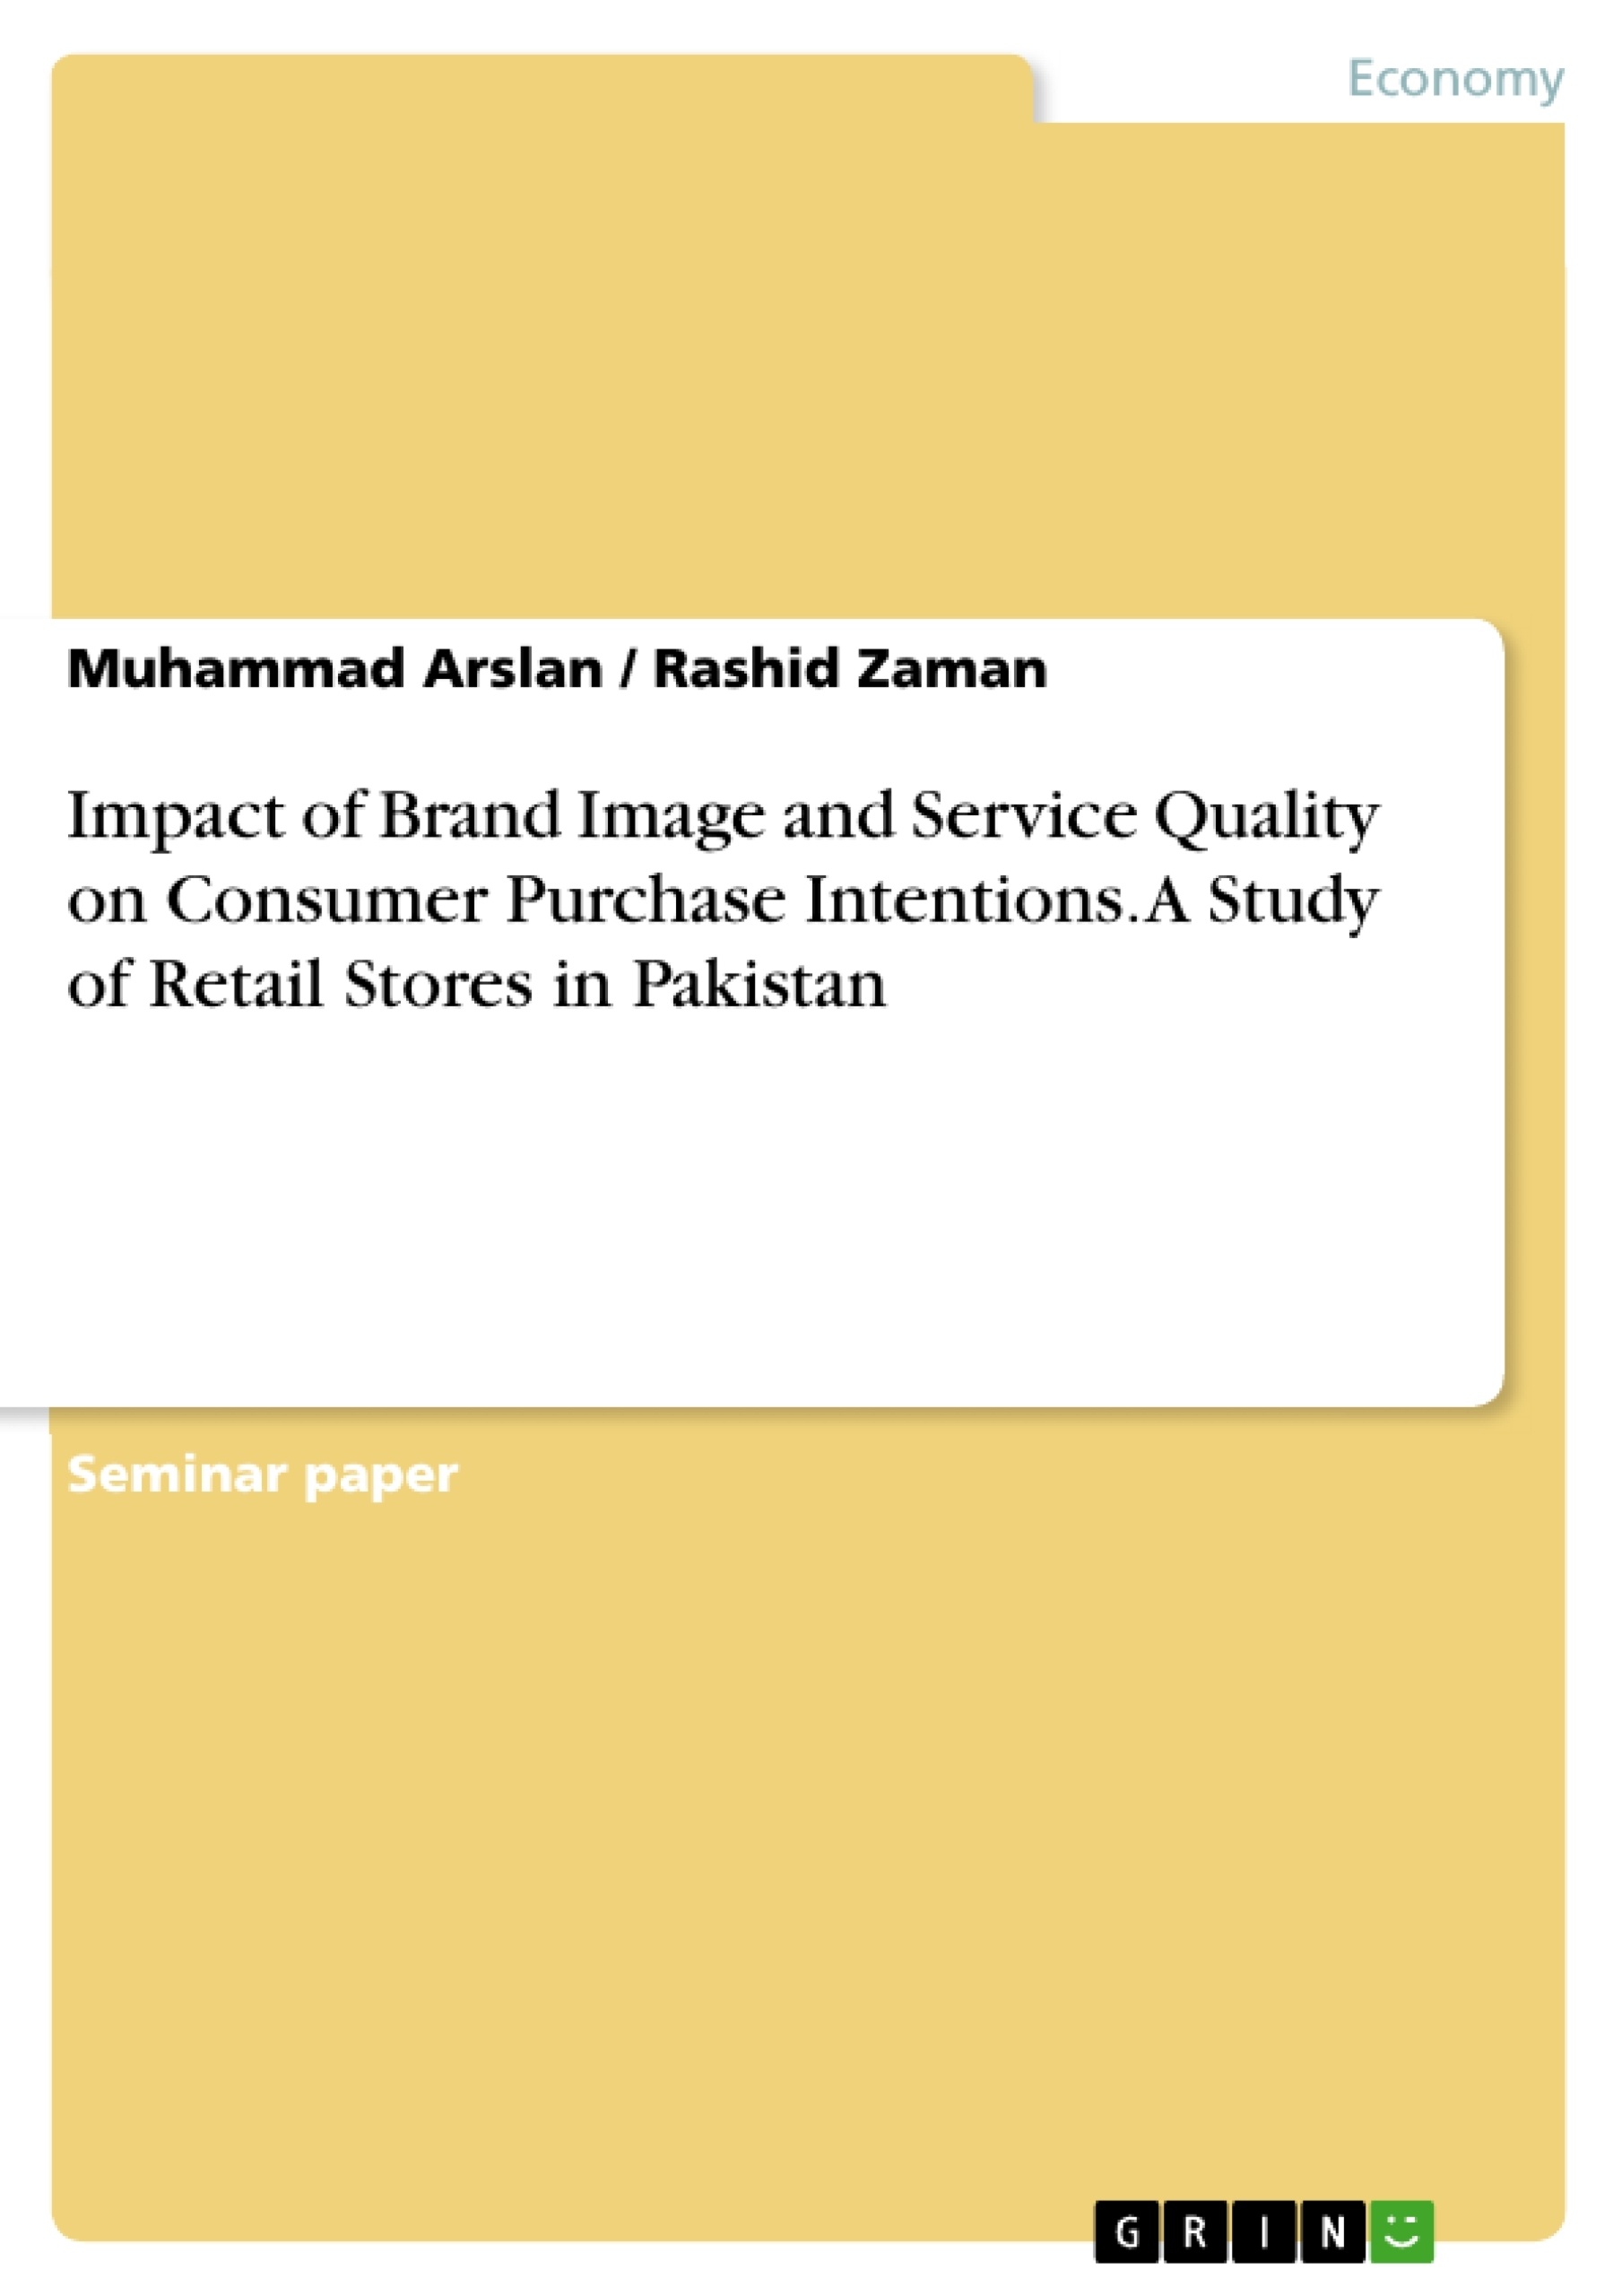 Title: Impact of Brand Image and Service Quality on Consumer Purchase Intentions. A Study of Retail Stores in Pakistan